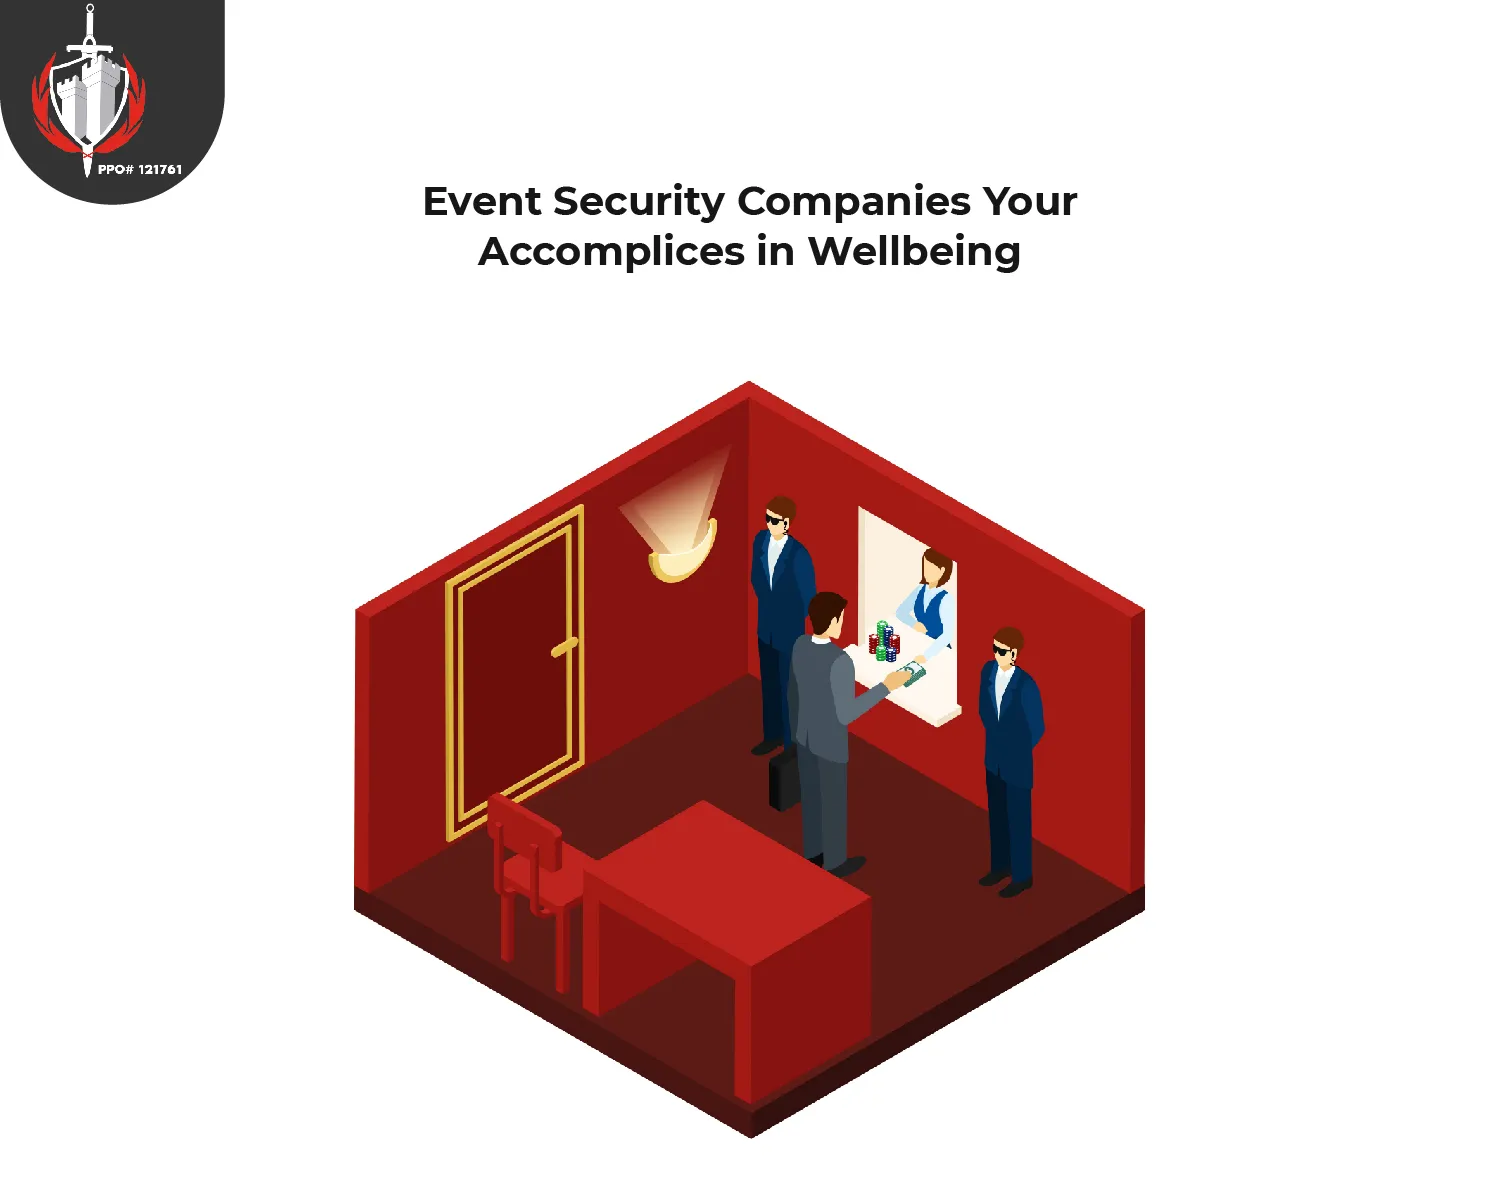 Event Security Companies: Your Accomplices in Wellbeing